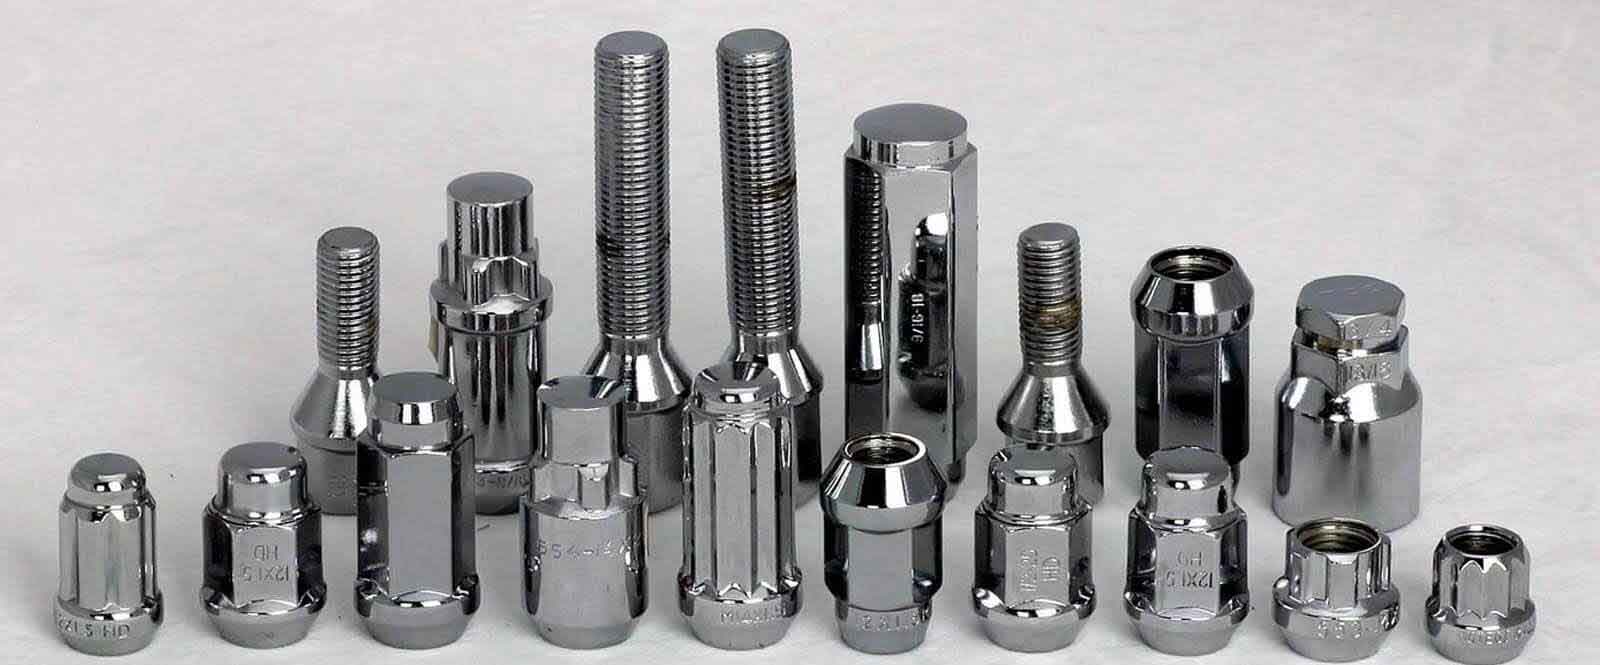 Round Bar, Wire and Fasteners Suppliers Abu Dhabi